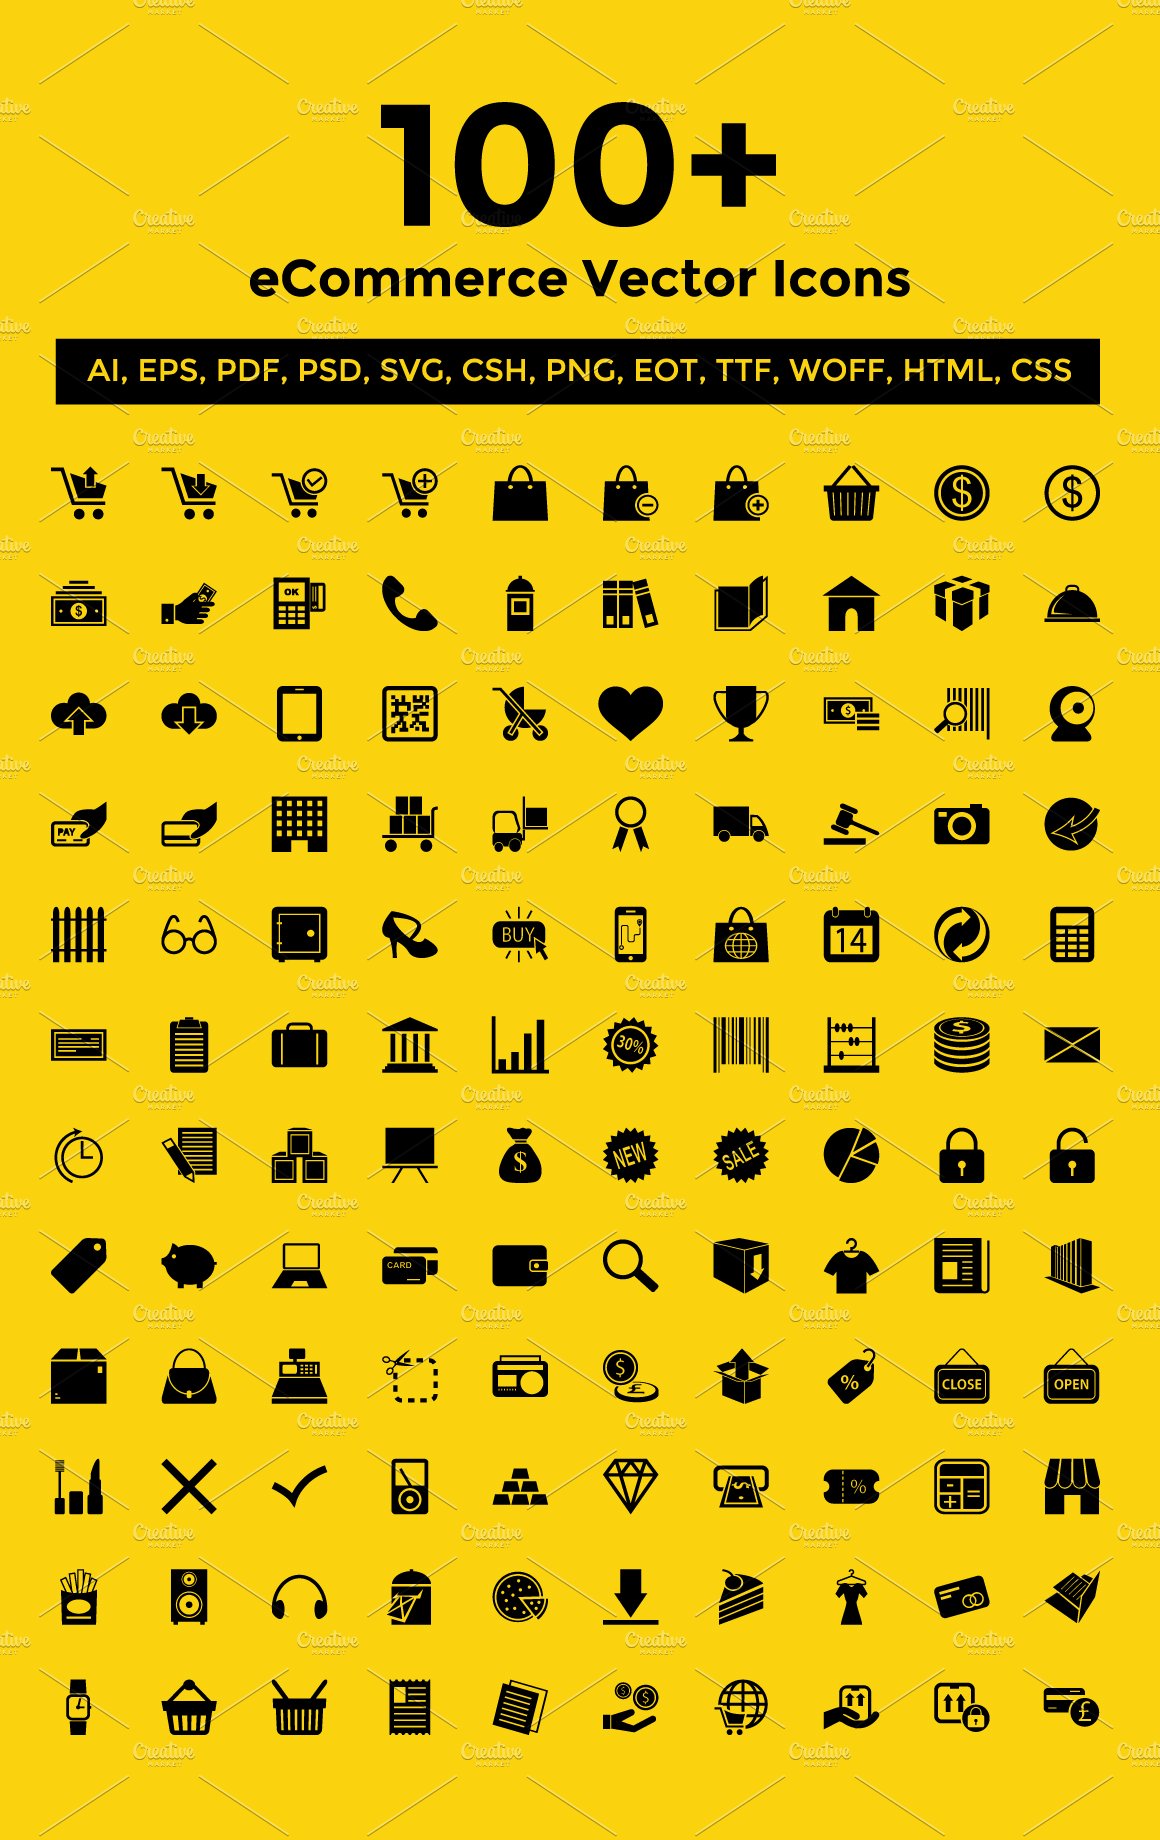 100+ eCommerce Vector Icons Pack cover image.